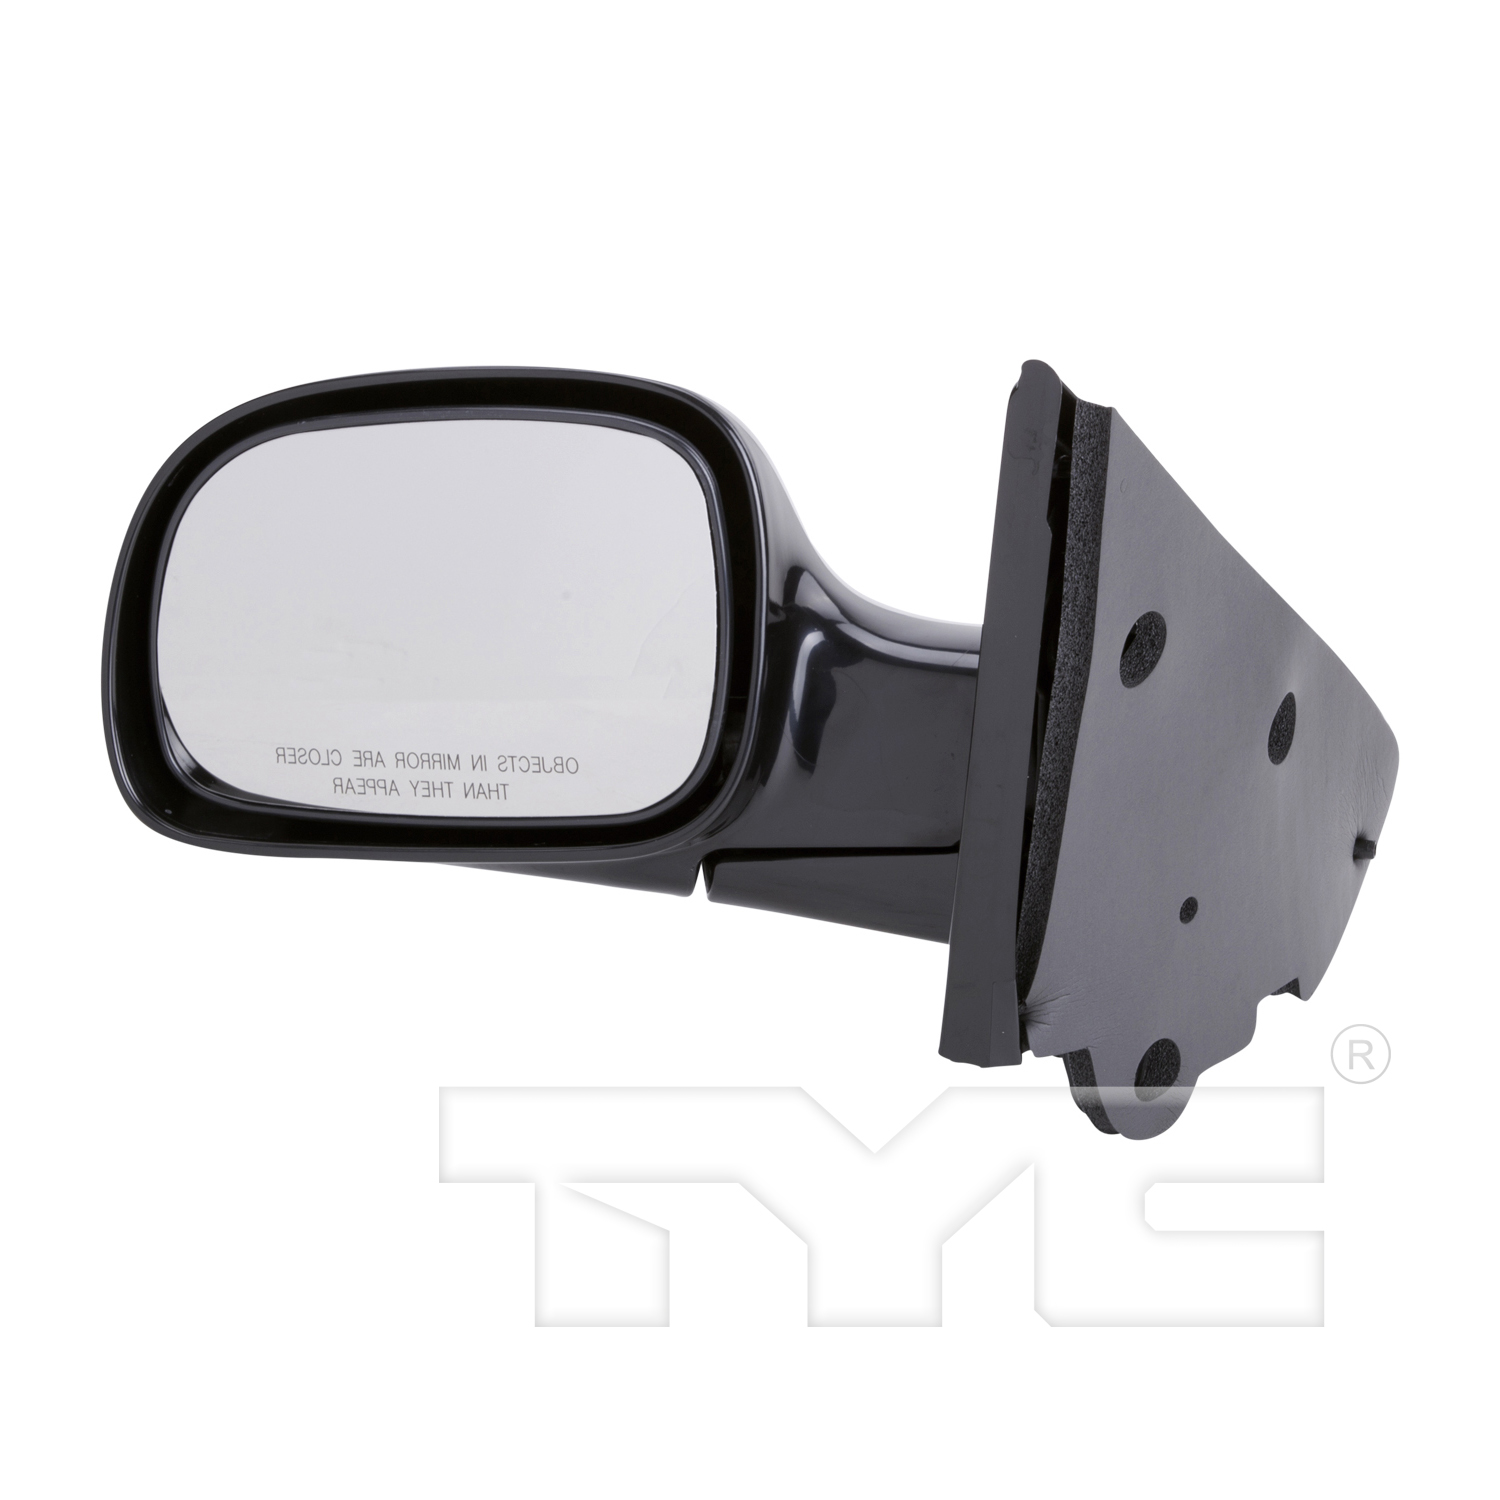 Aftermarket MIRRORS for CHRYSLER - VOYAGER, VOYAGER,01-03,LT Mirror outside rear view